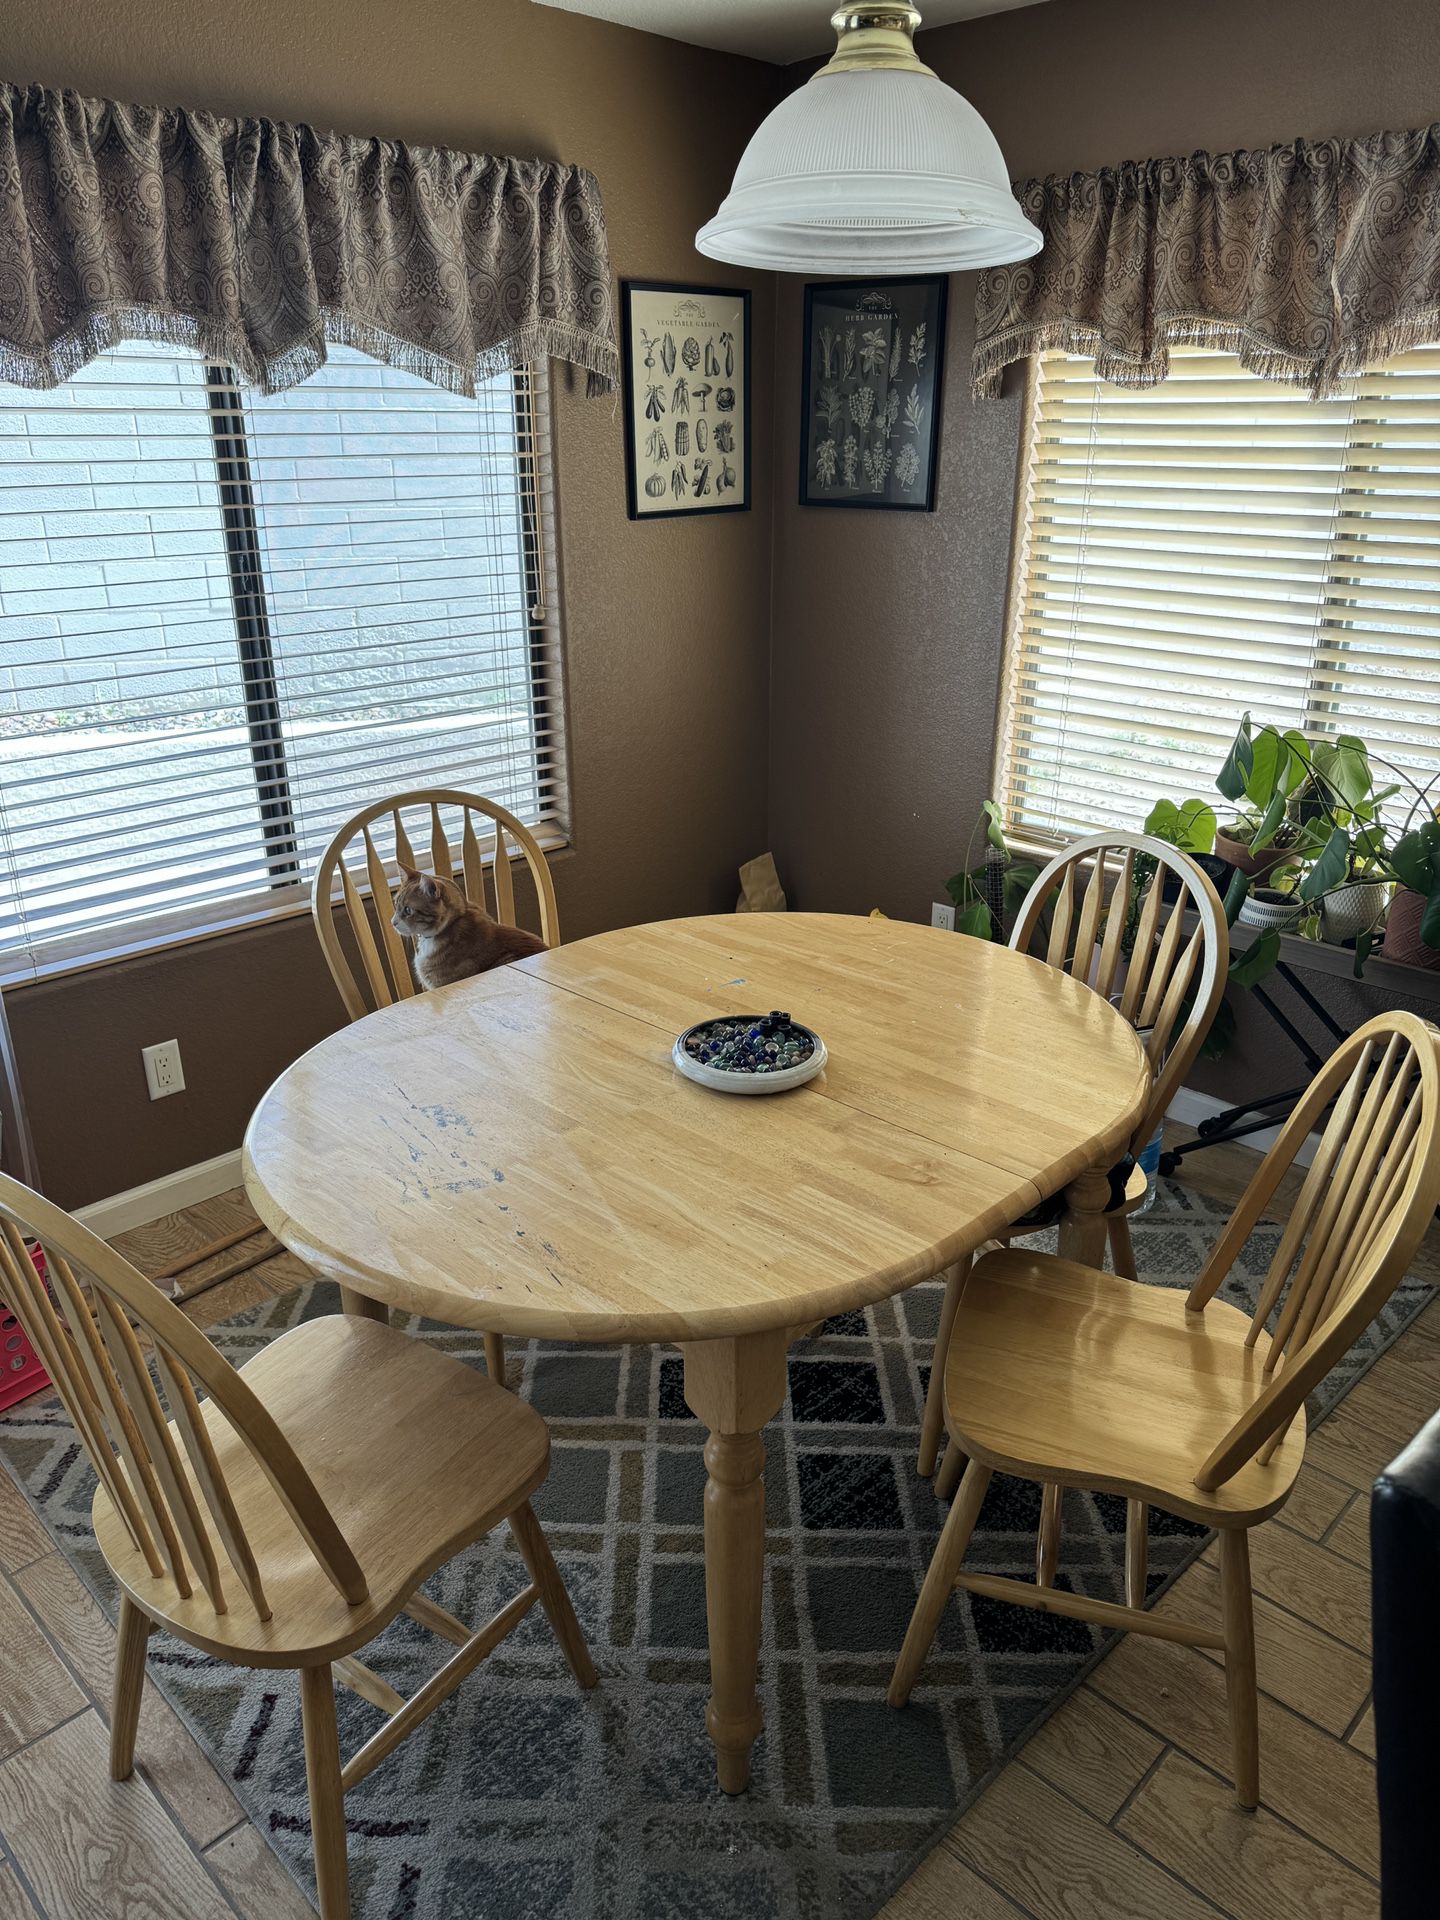 **MOVING SALE**6 Pc Breakfast/Dining Table w Leaf